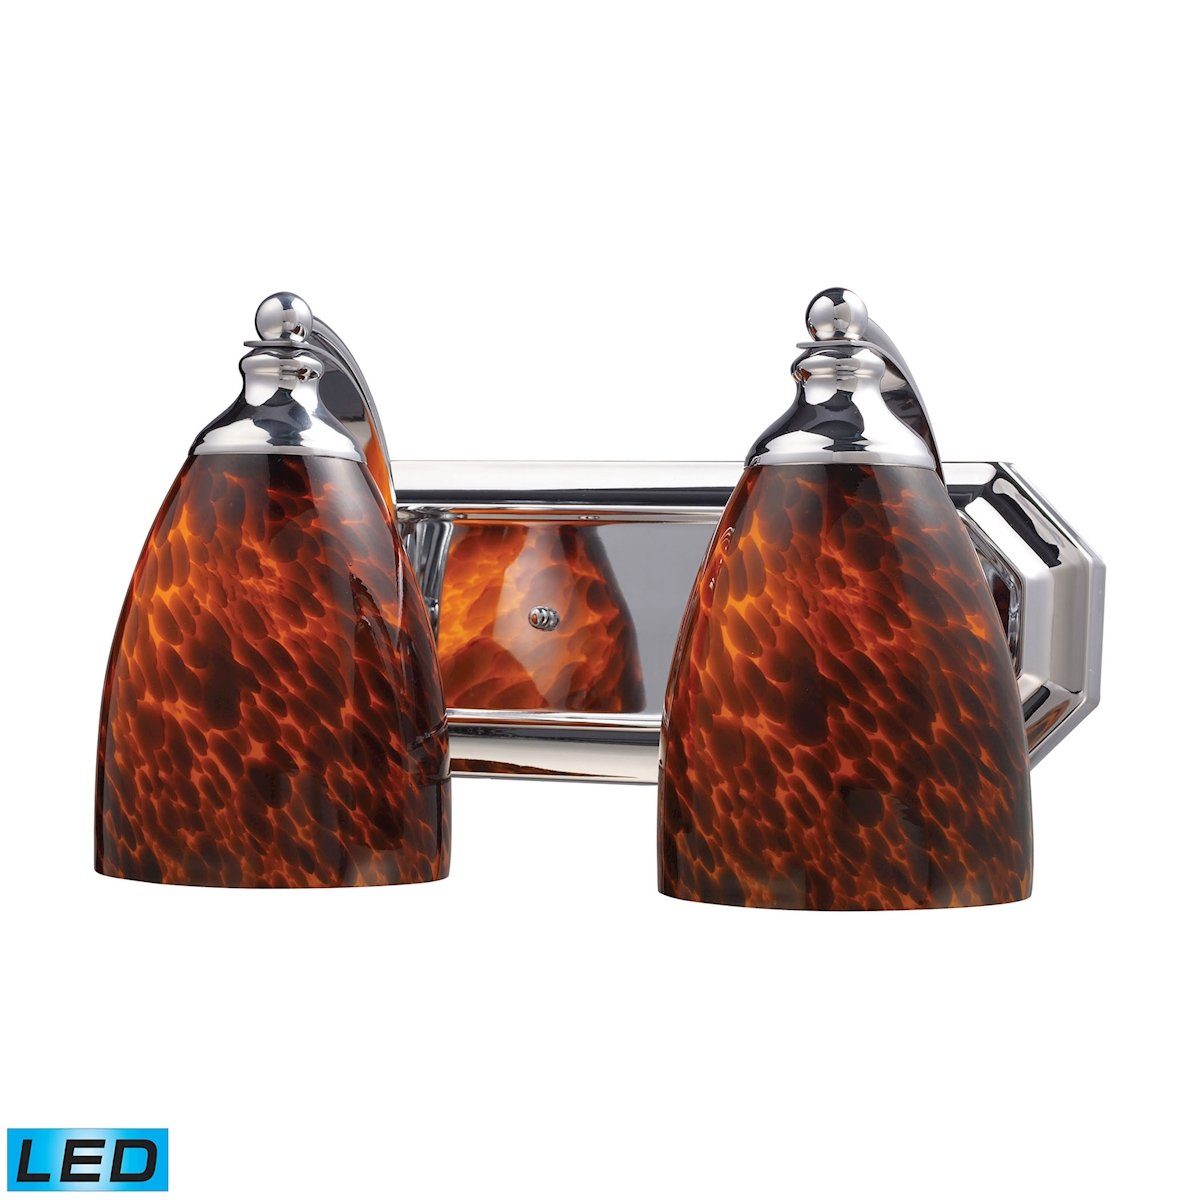 Bath And Spa 2 Light LED Vanity In Polished Chrome And Espresso Glass Wall Elk Lighting 